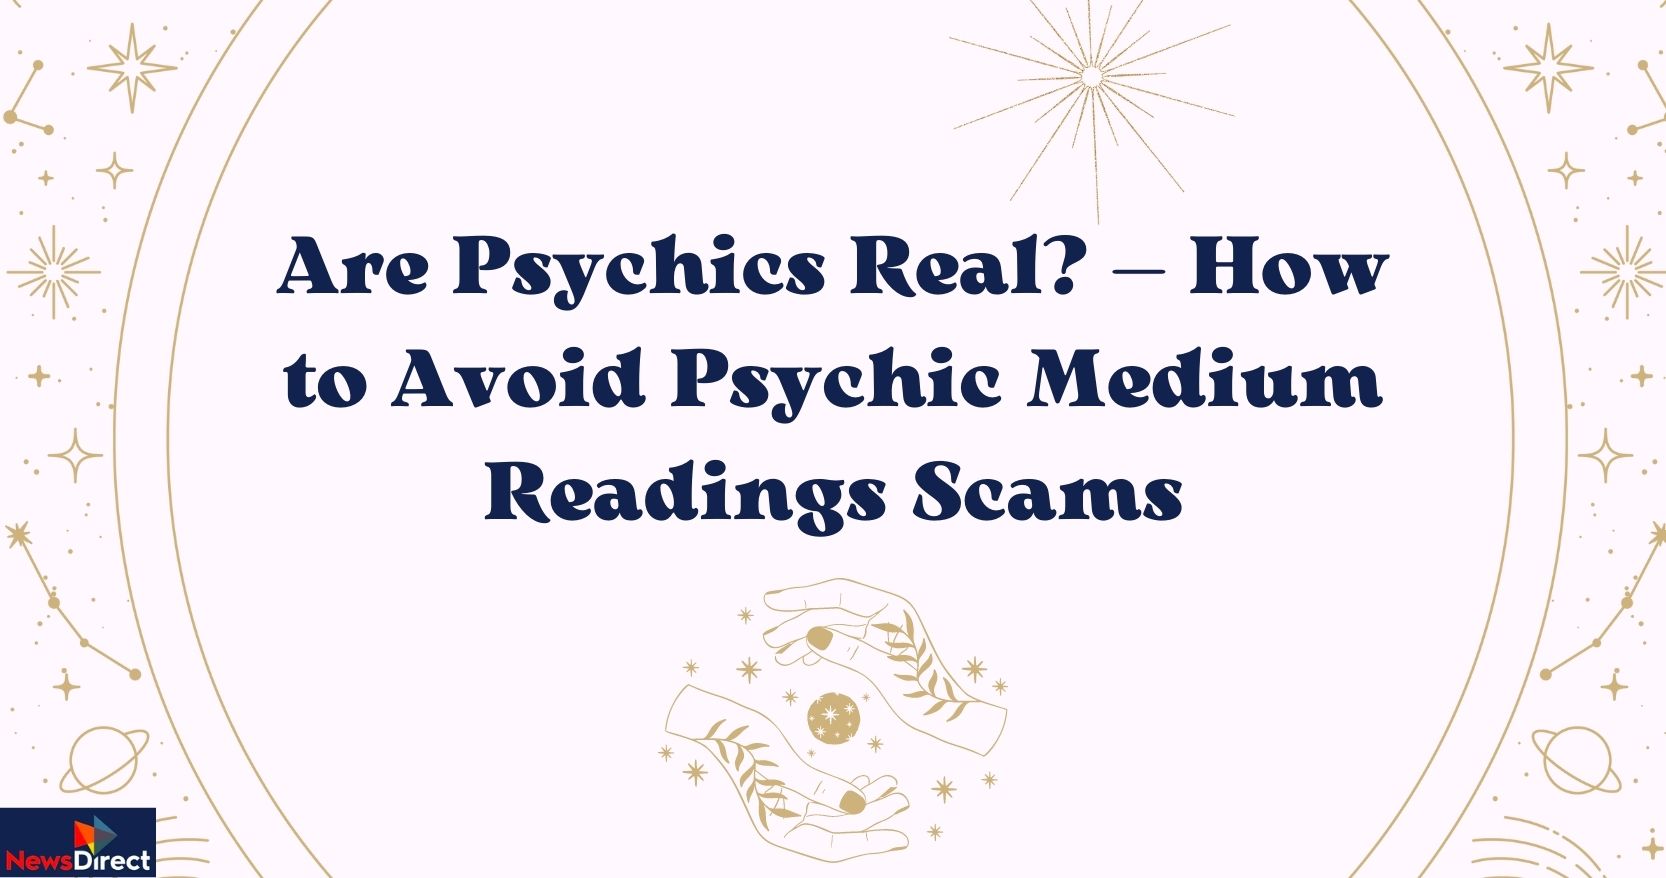 Are Psychics Real